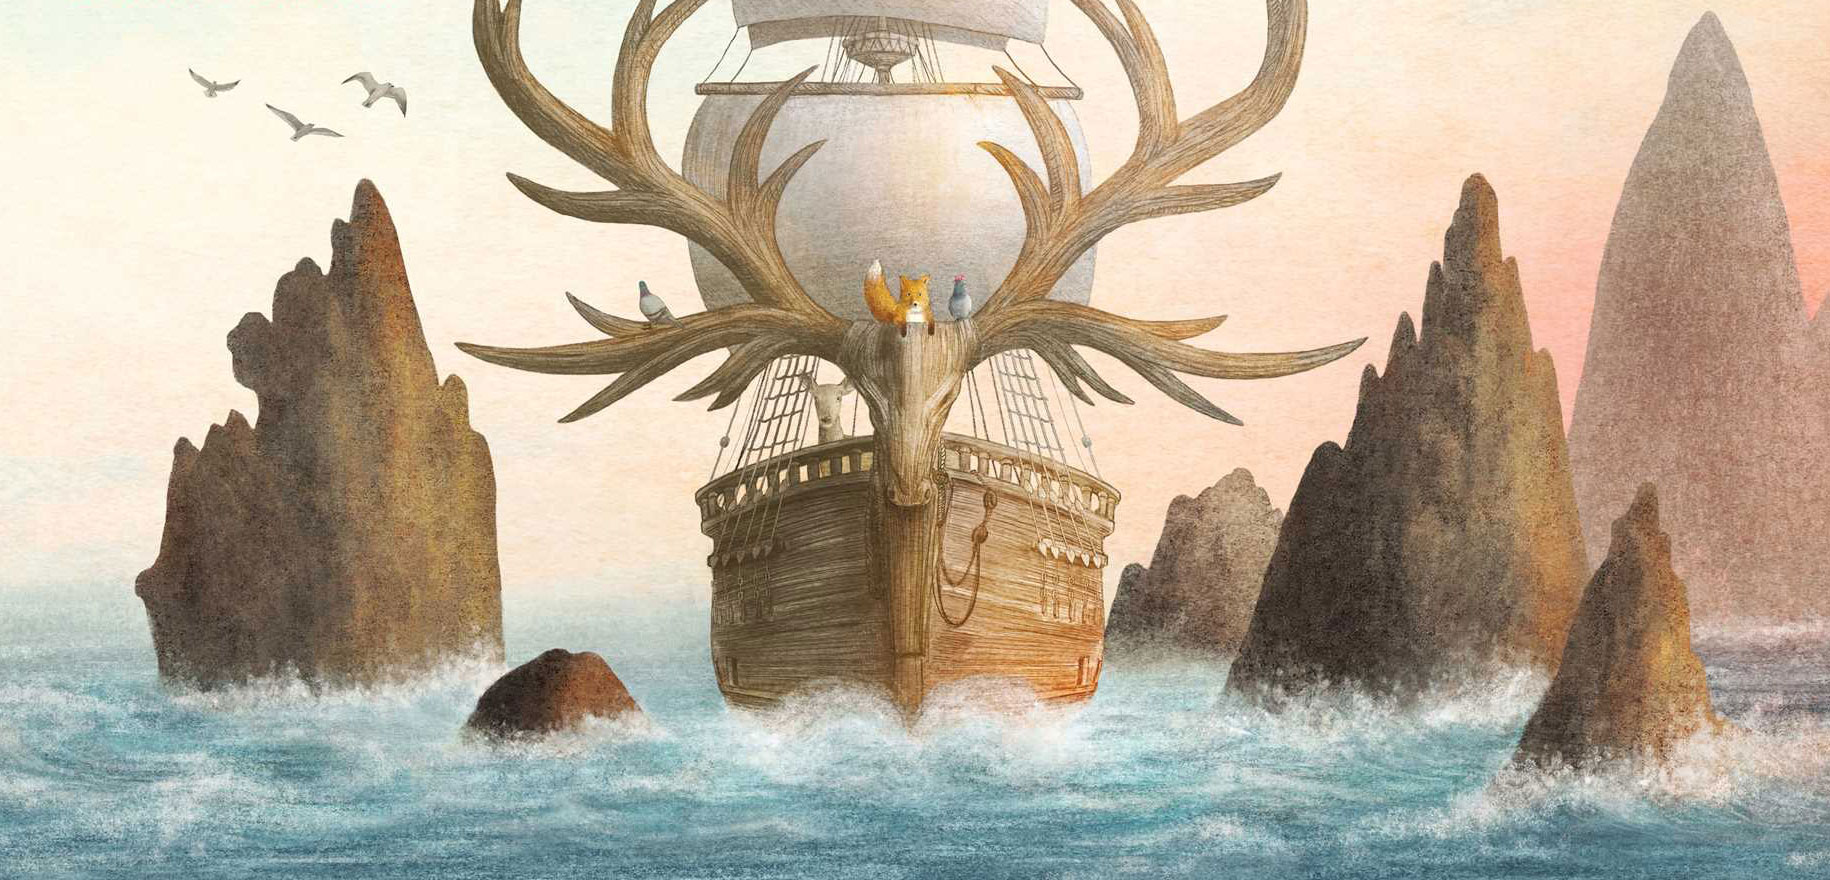 A detail of the cover illustration by Terry Fan and Eric Fan for The Antlered Ship.